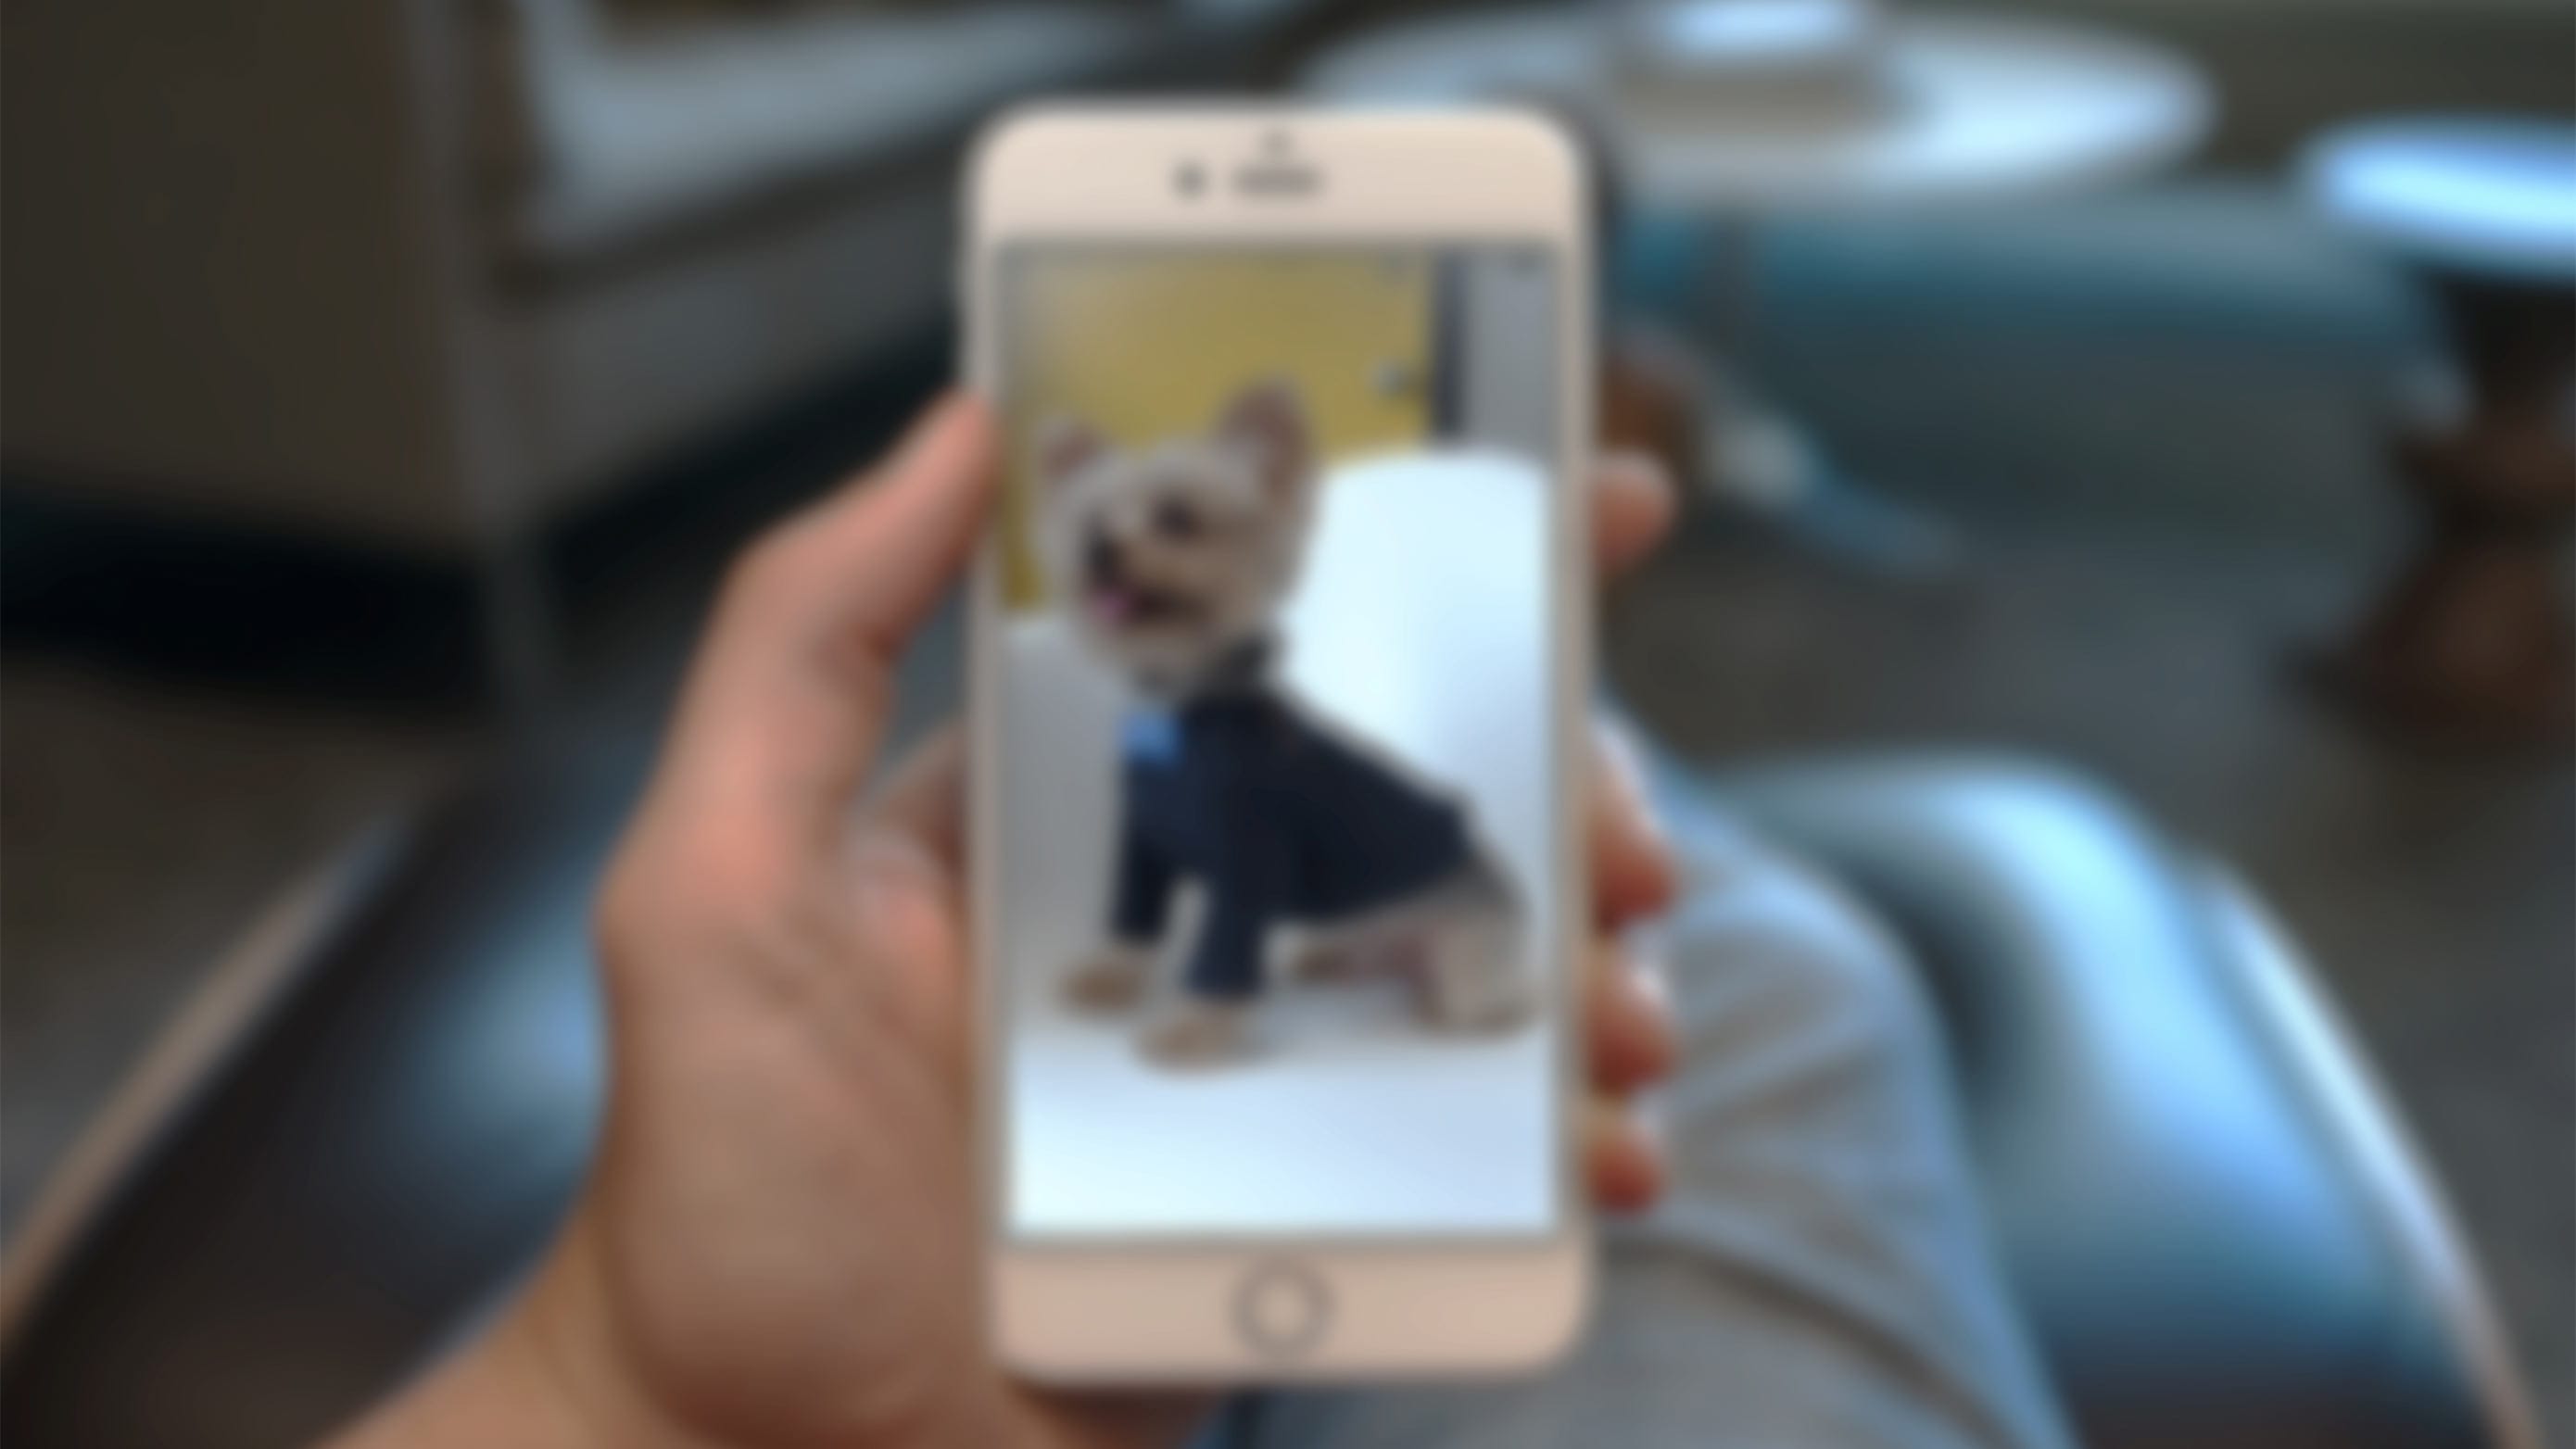 Things like photos and other objects may not appear as clearly as they have before, becoming blurry and distorted.